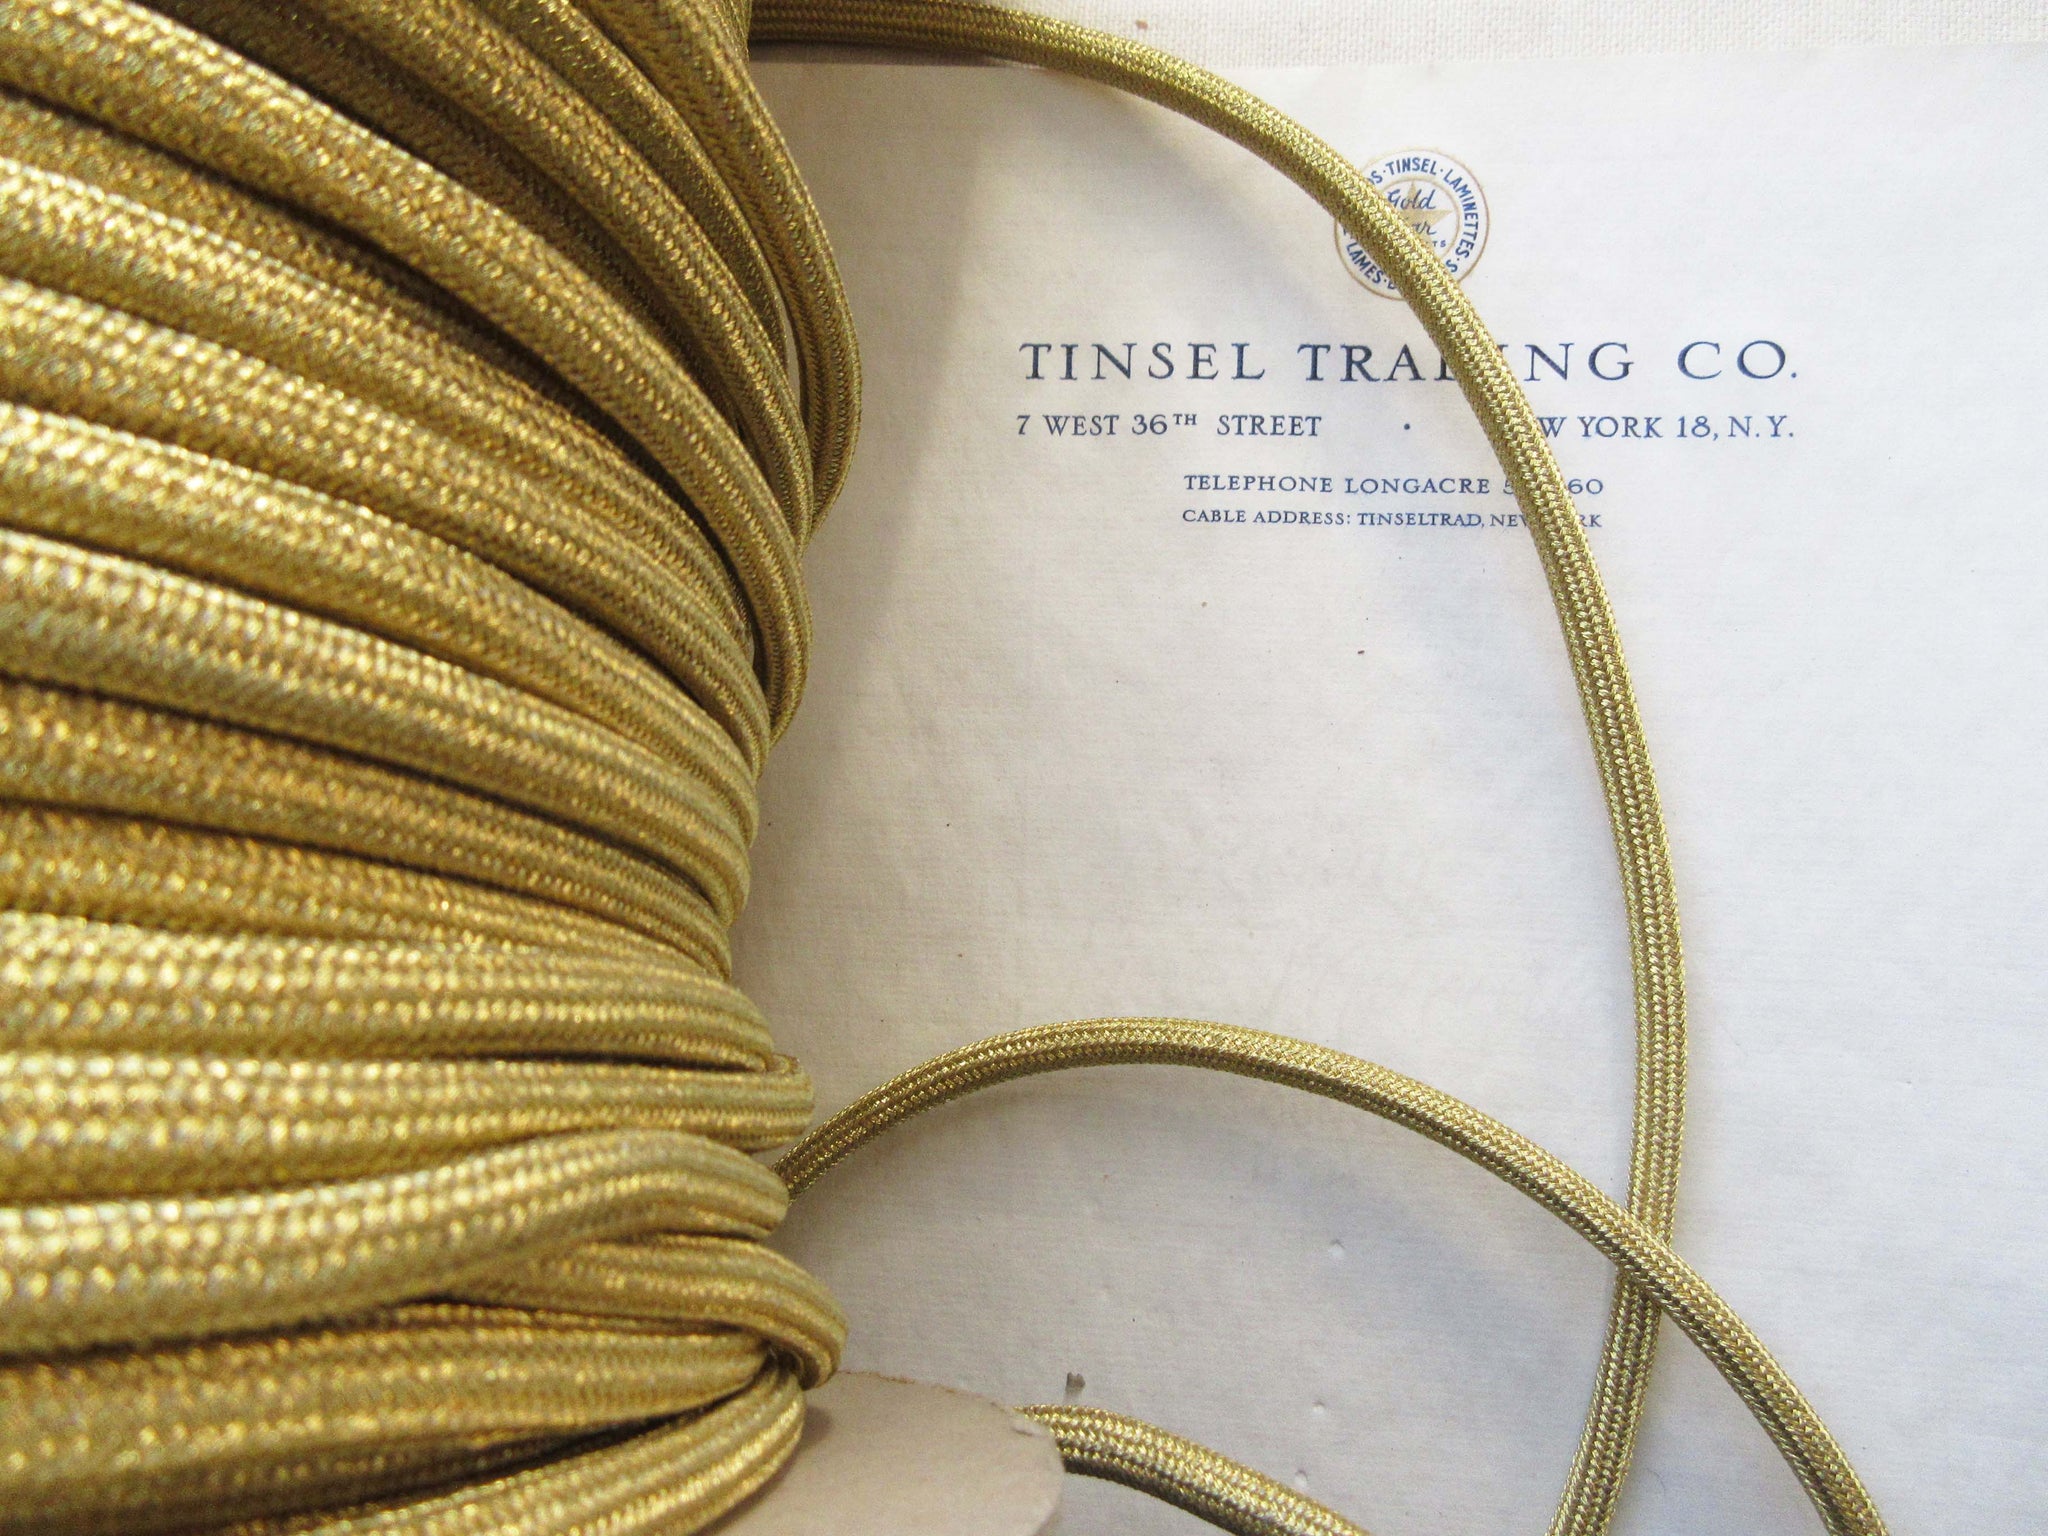 Metalized Rope/Cording